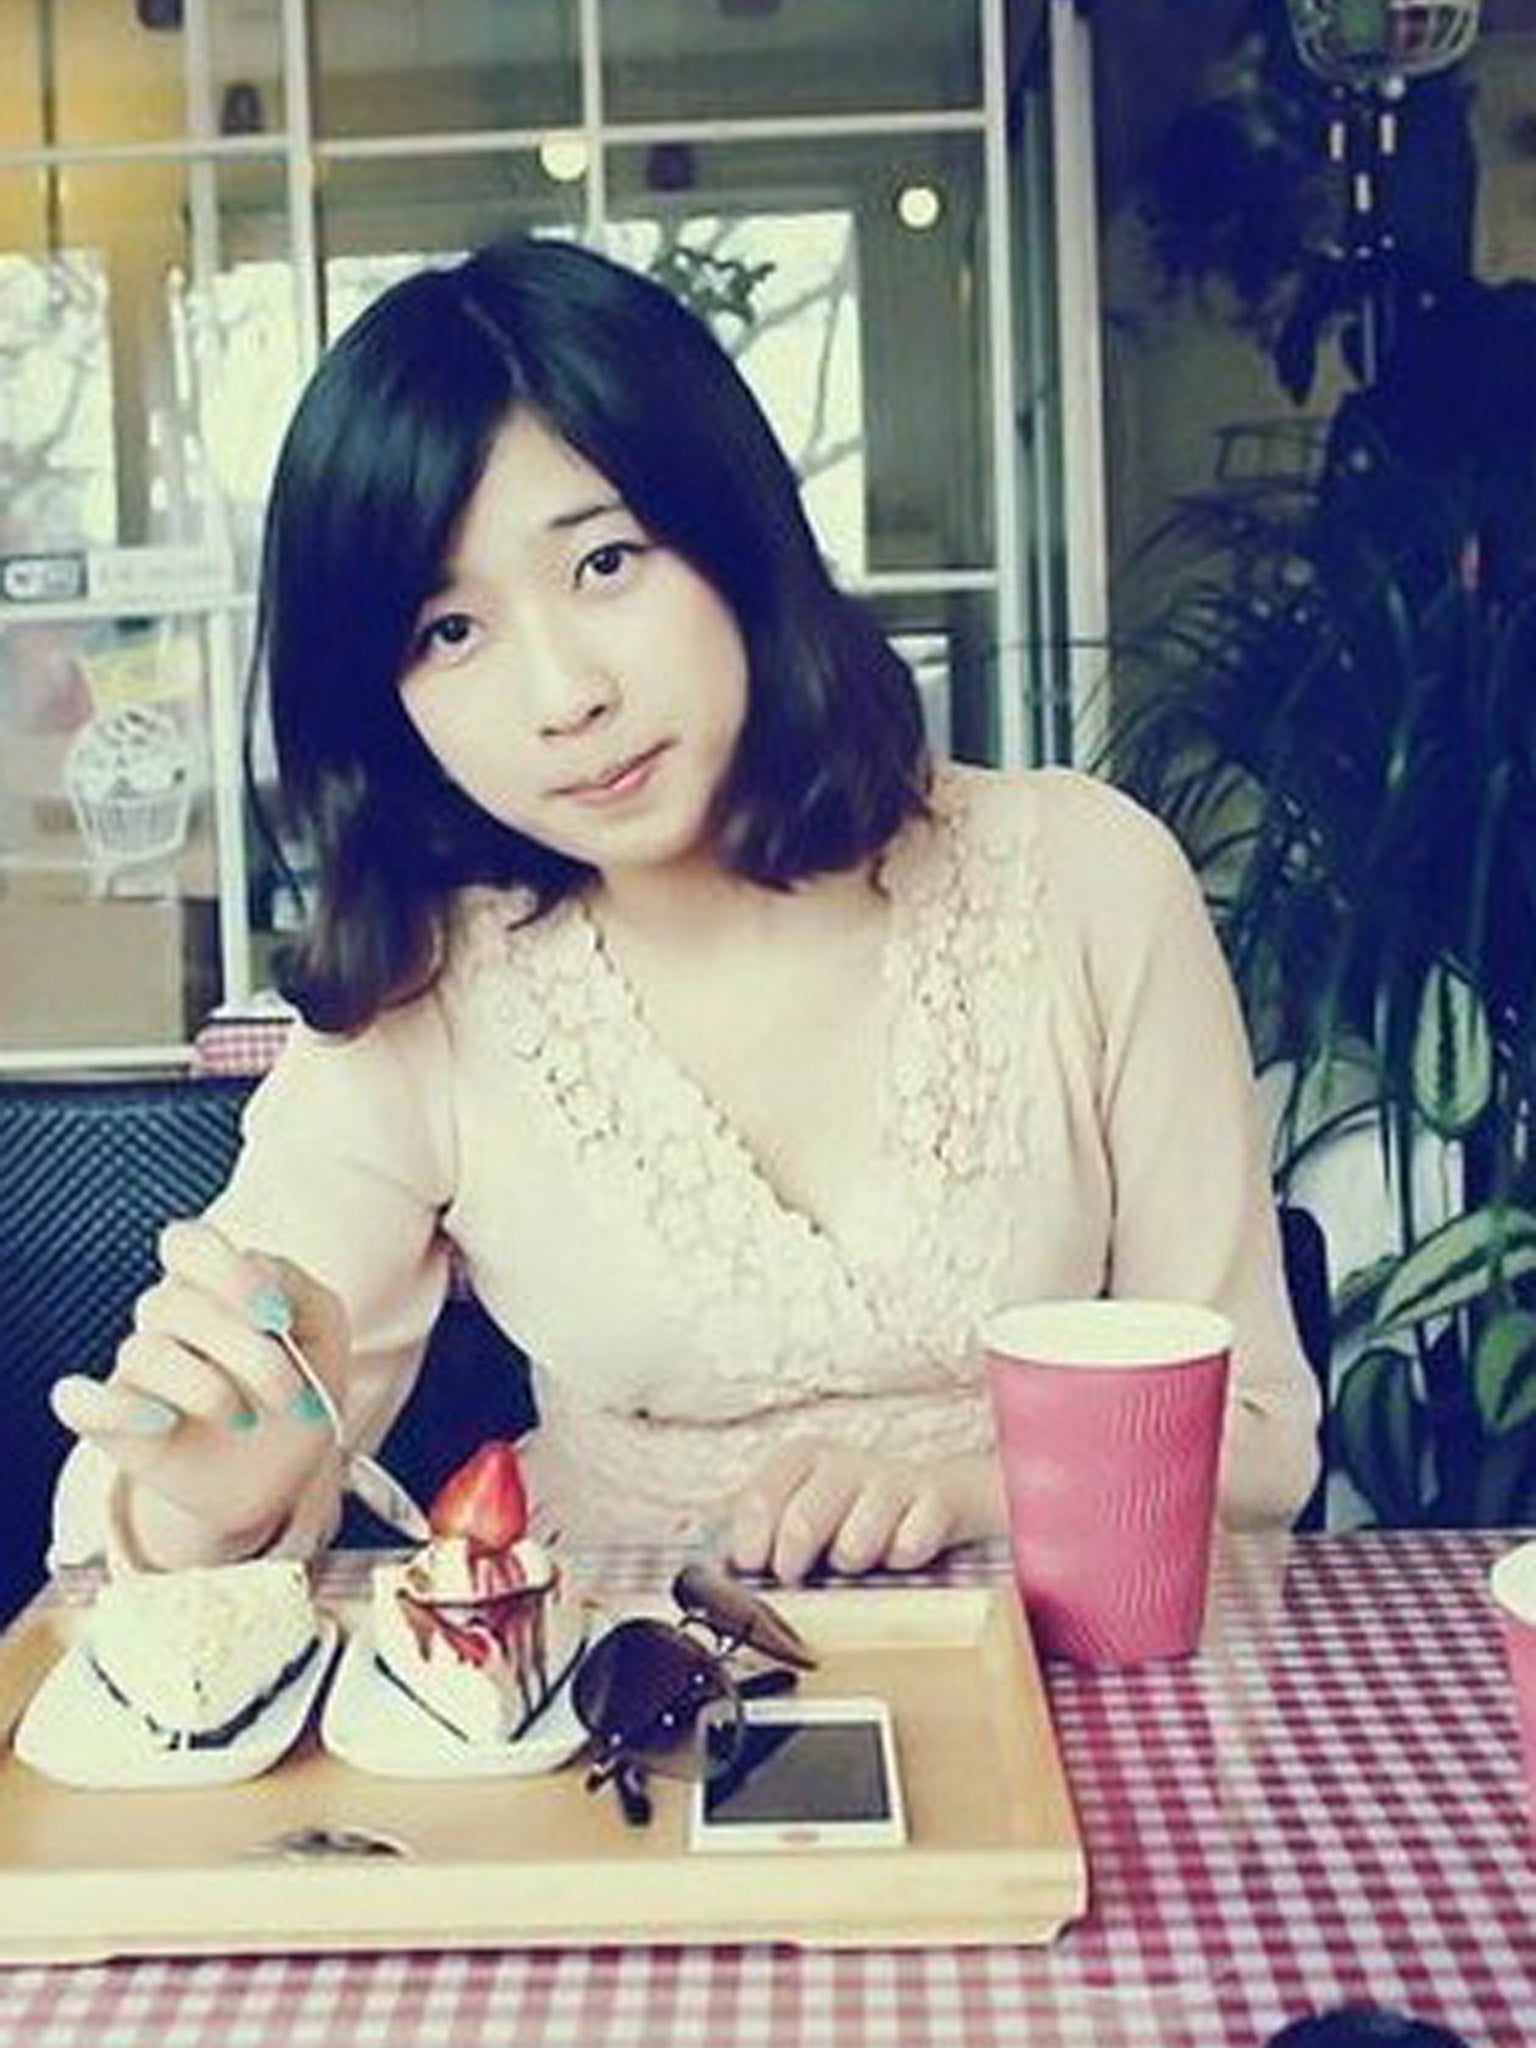 Lu Lingzi who was one of the three people killed in the Boston Marathon bombing